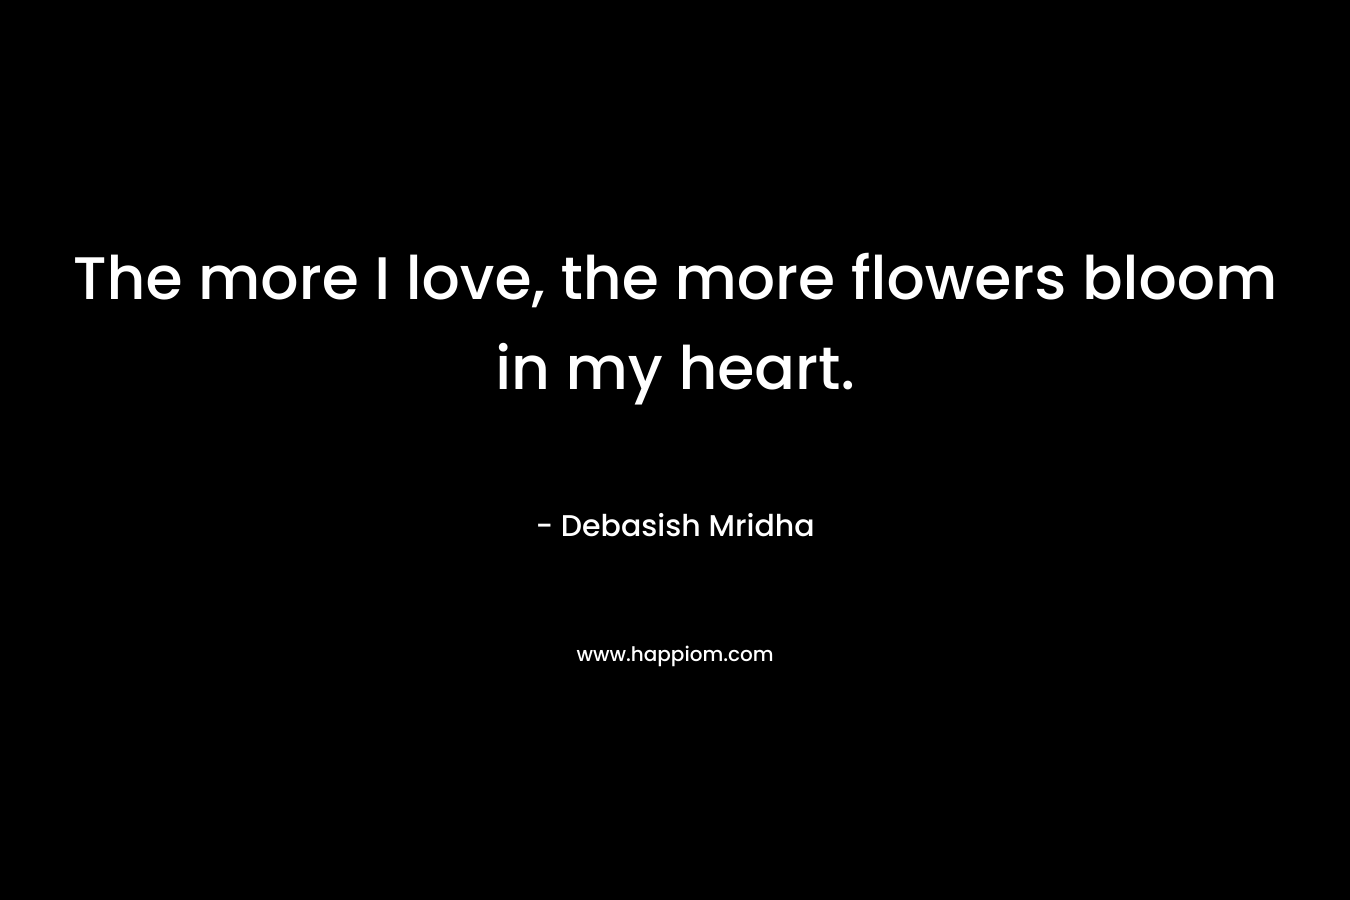 The more I love, the more flowers bloom in my heart.